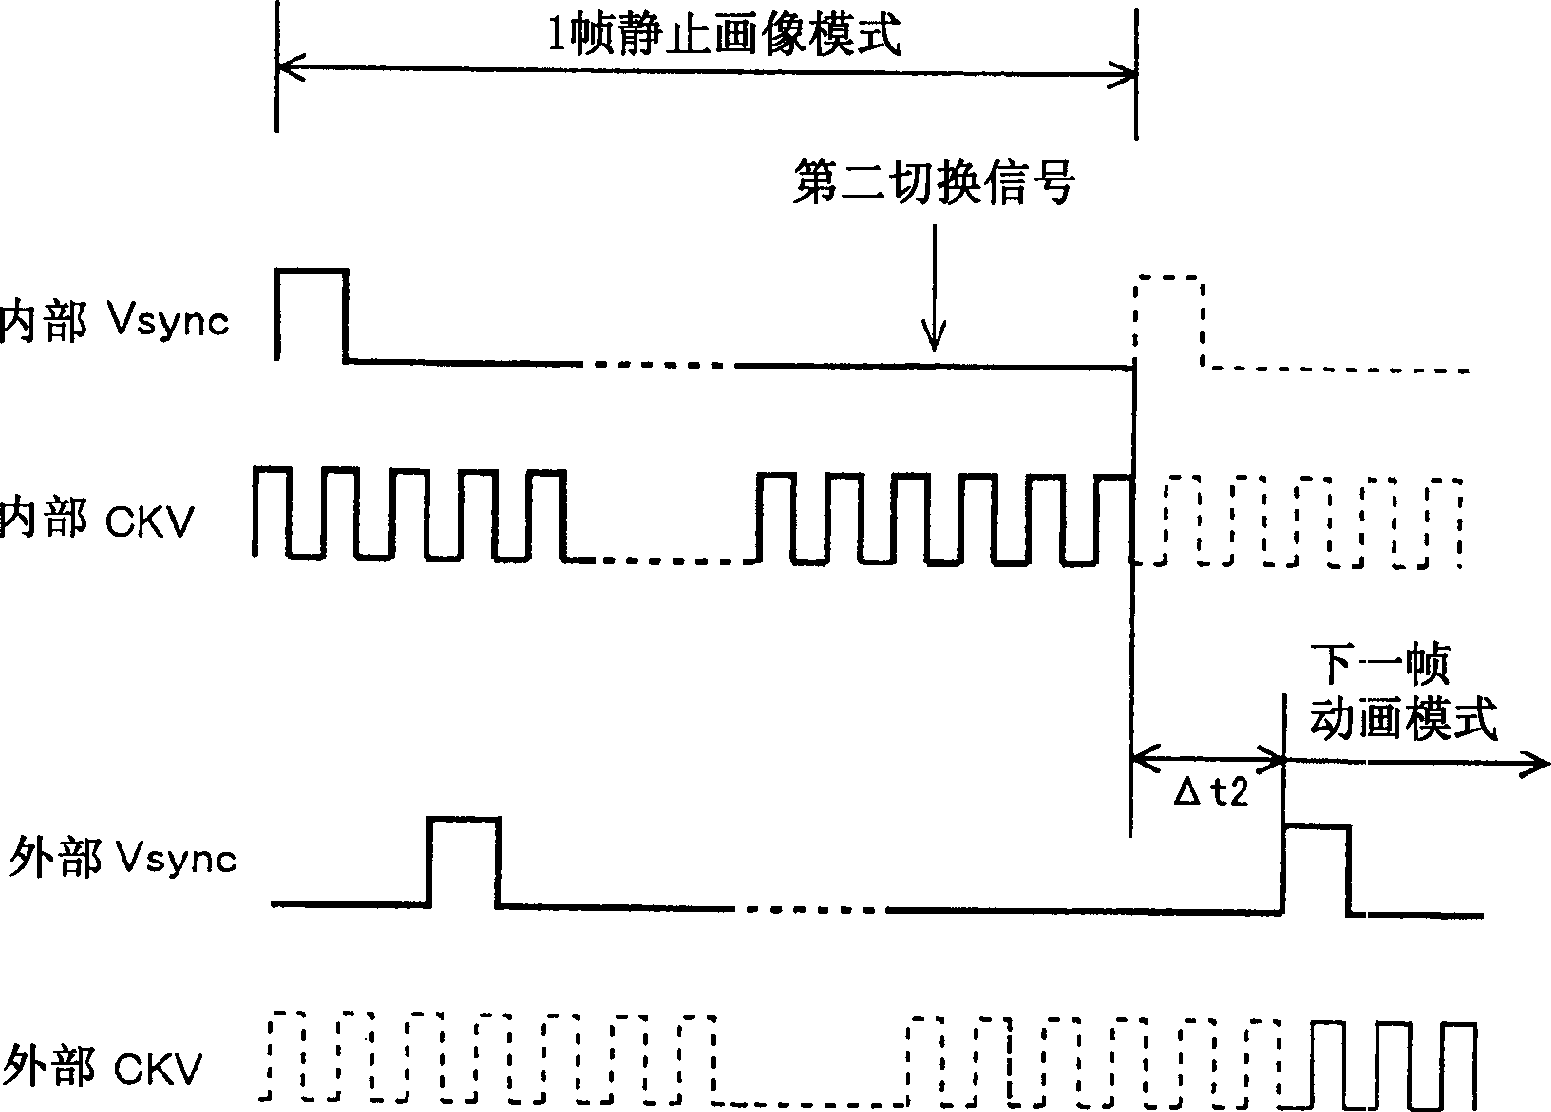 Active matric-type display device and its controller